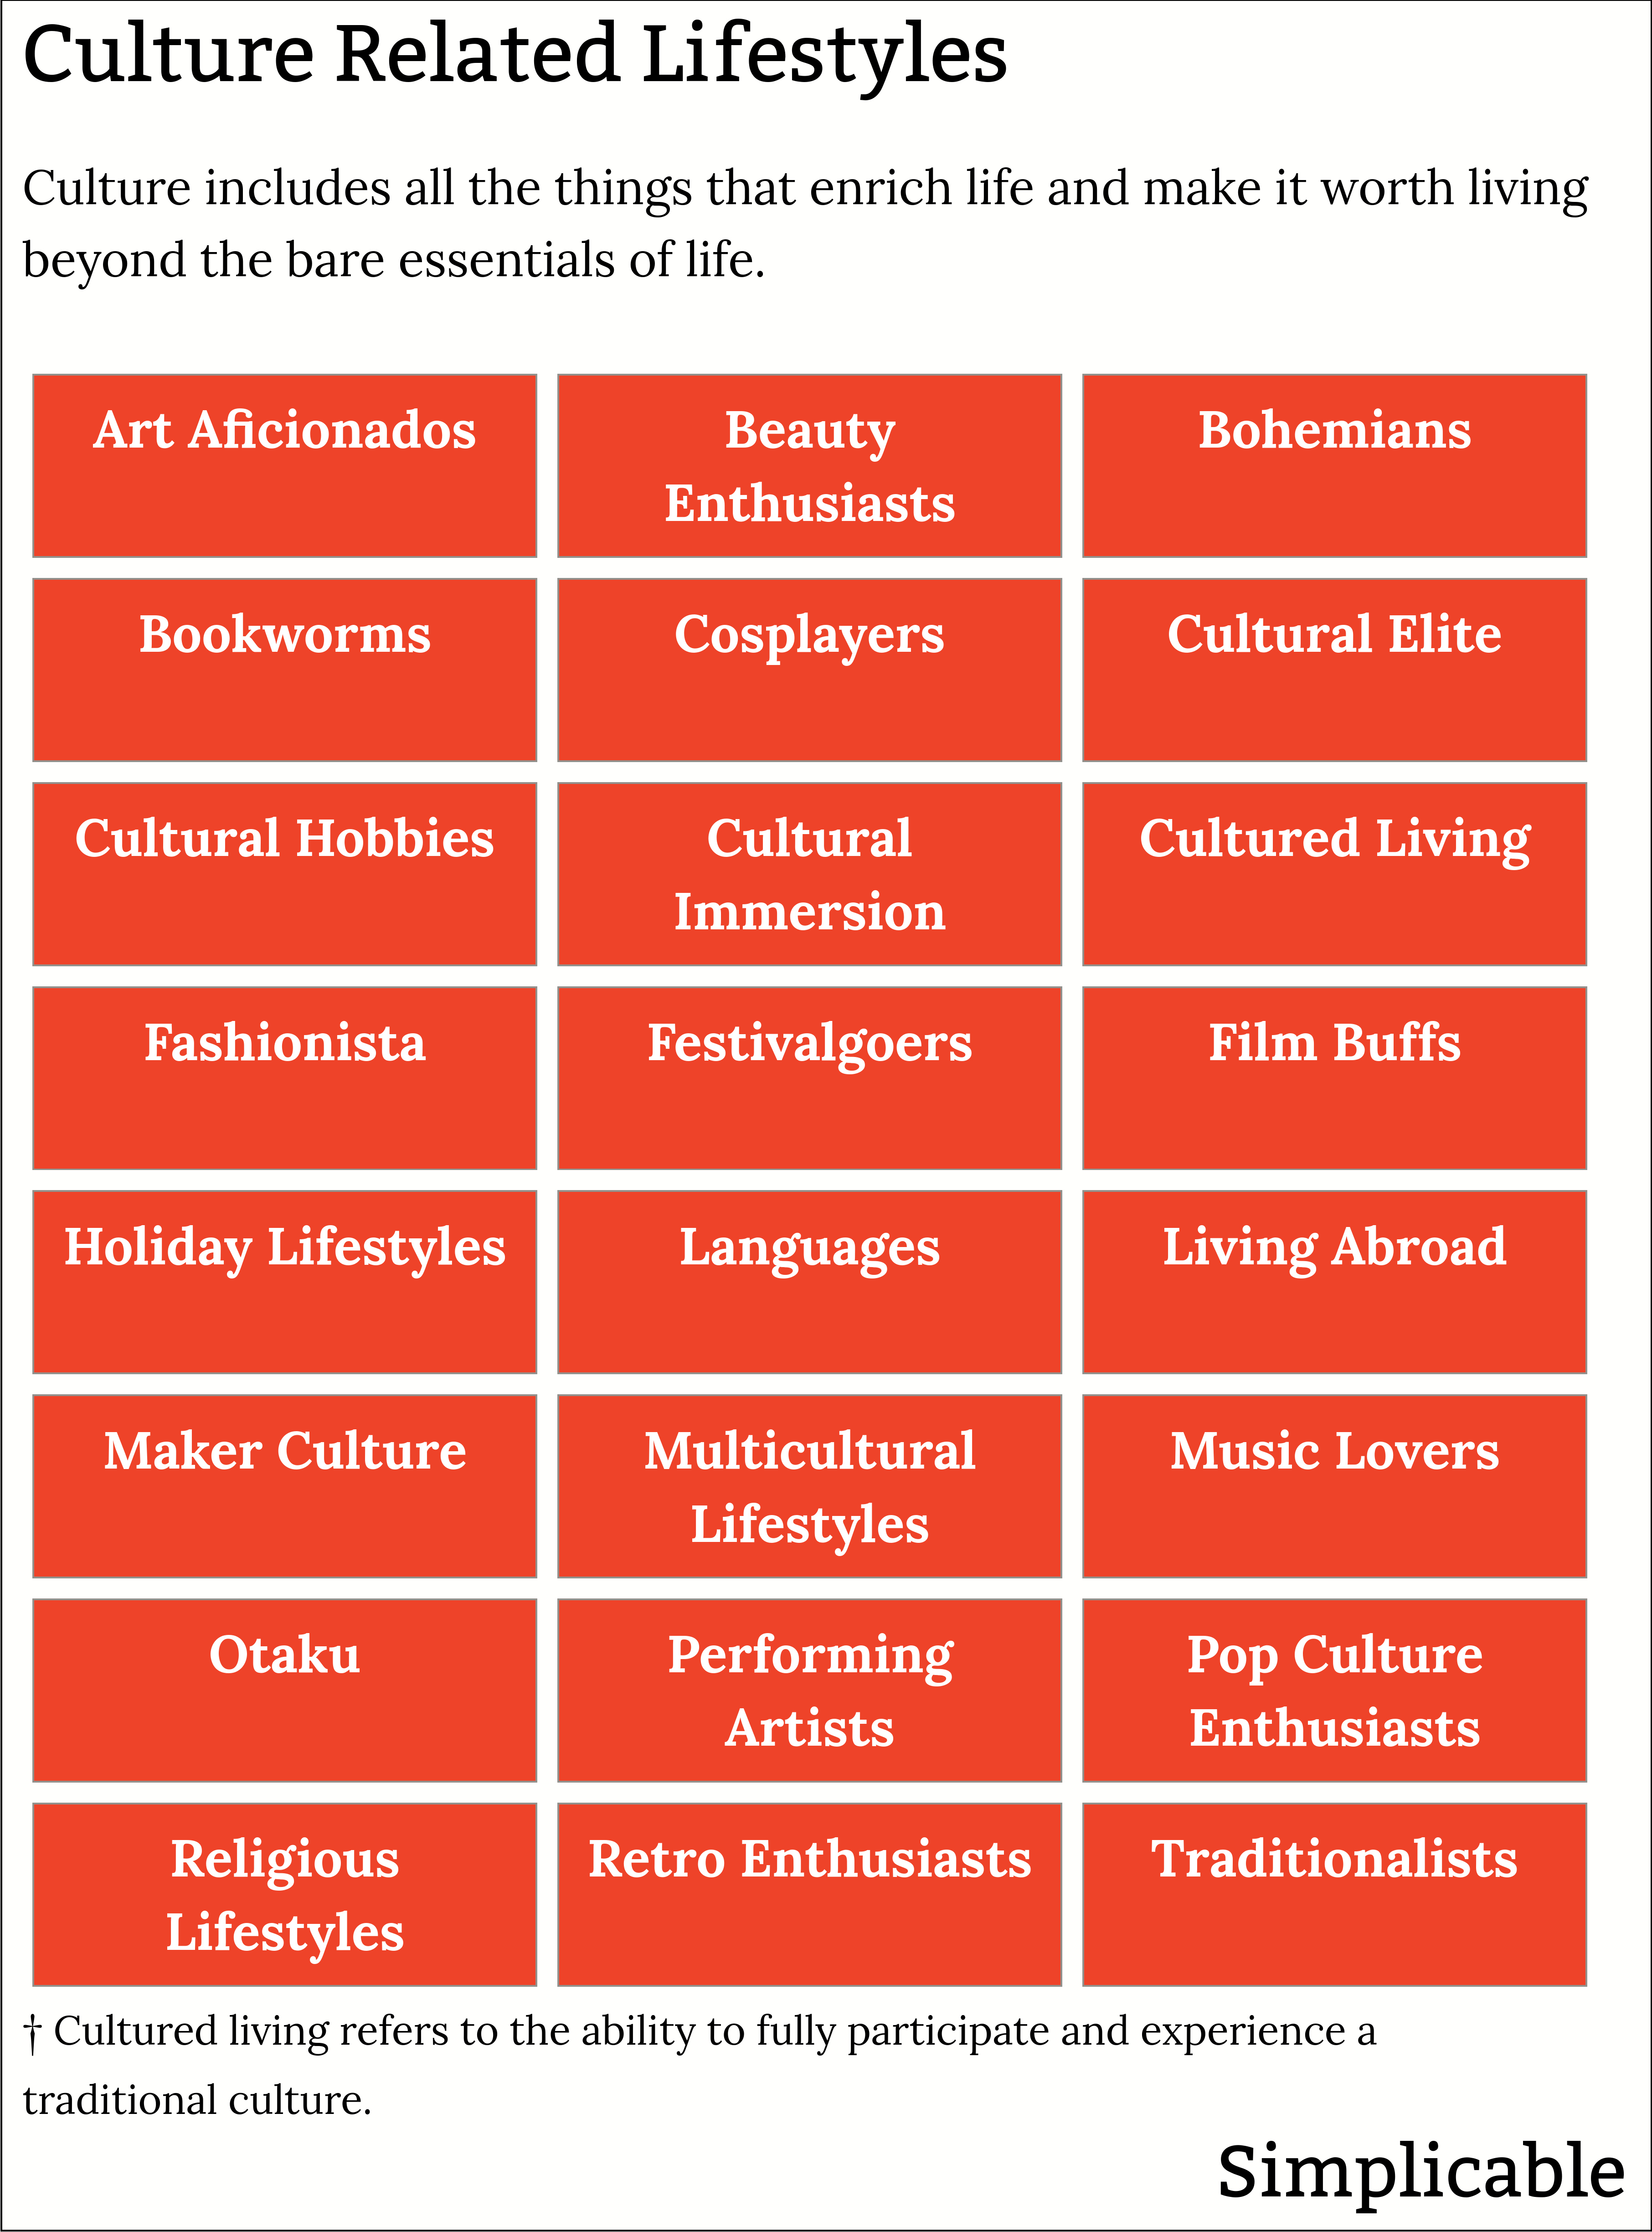 culture related lifestyles